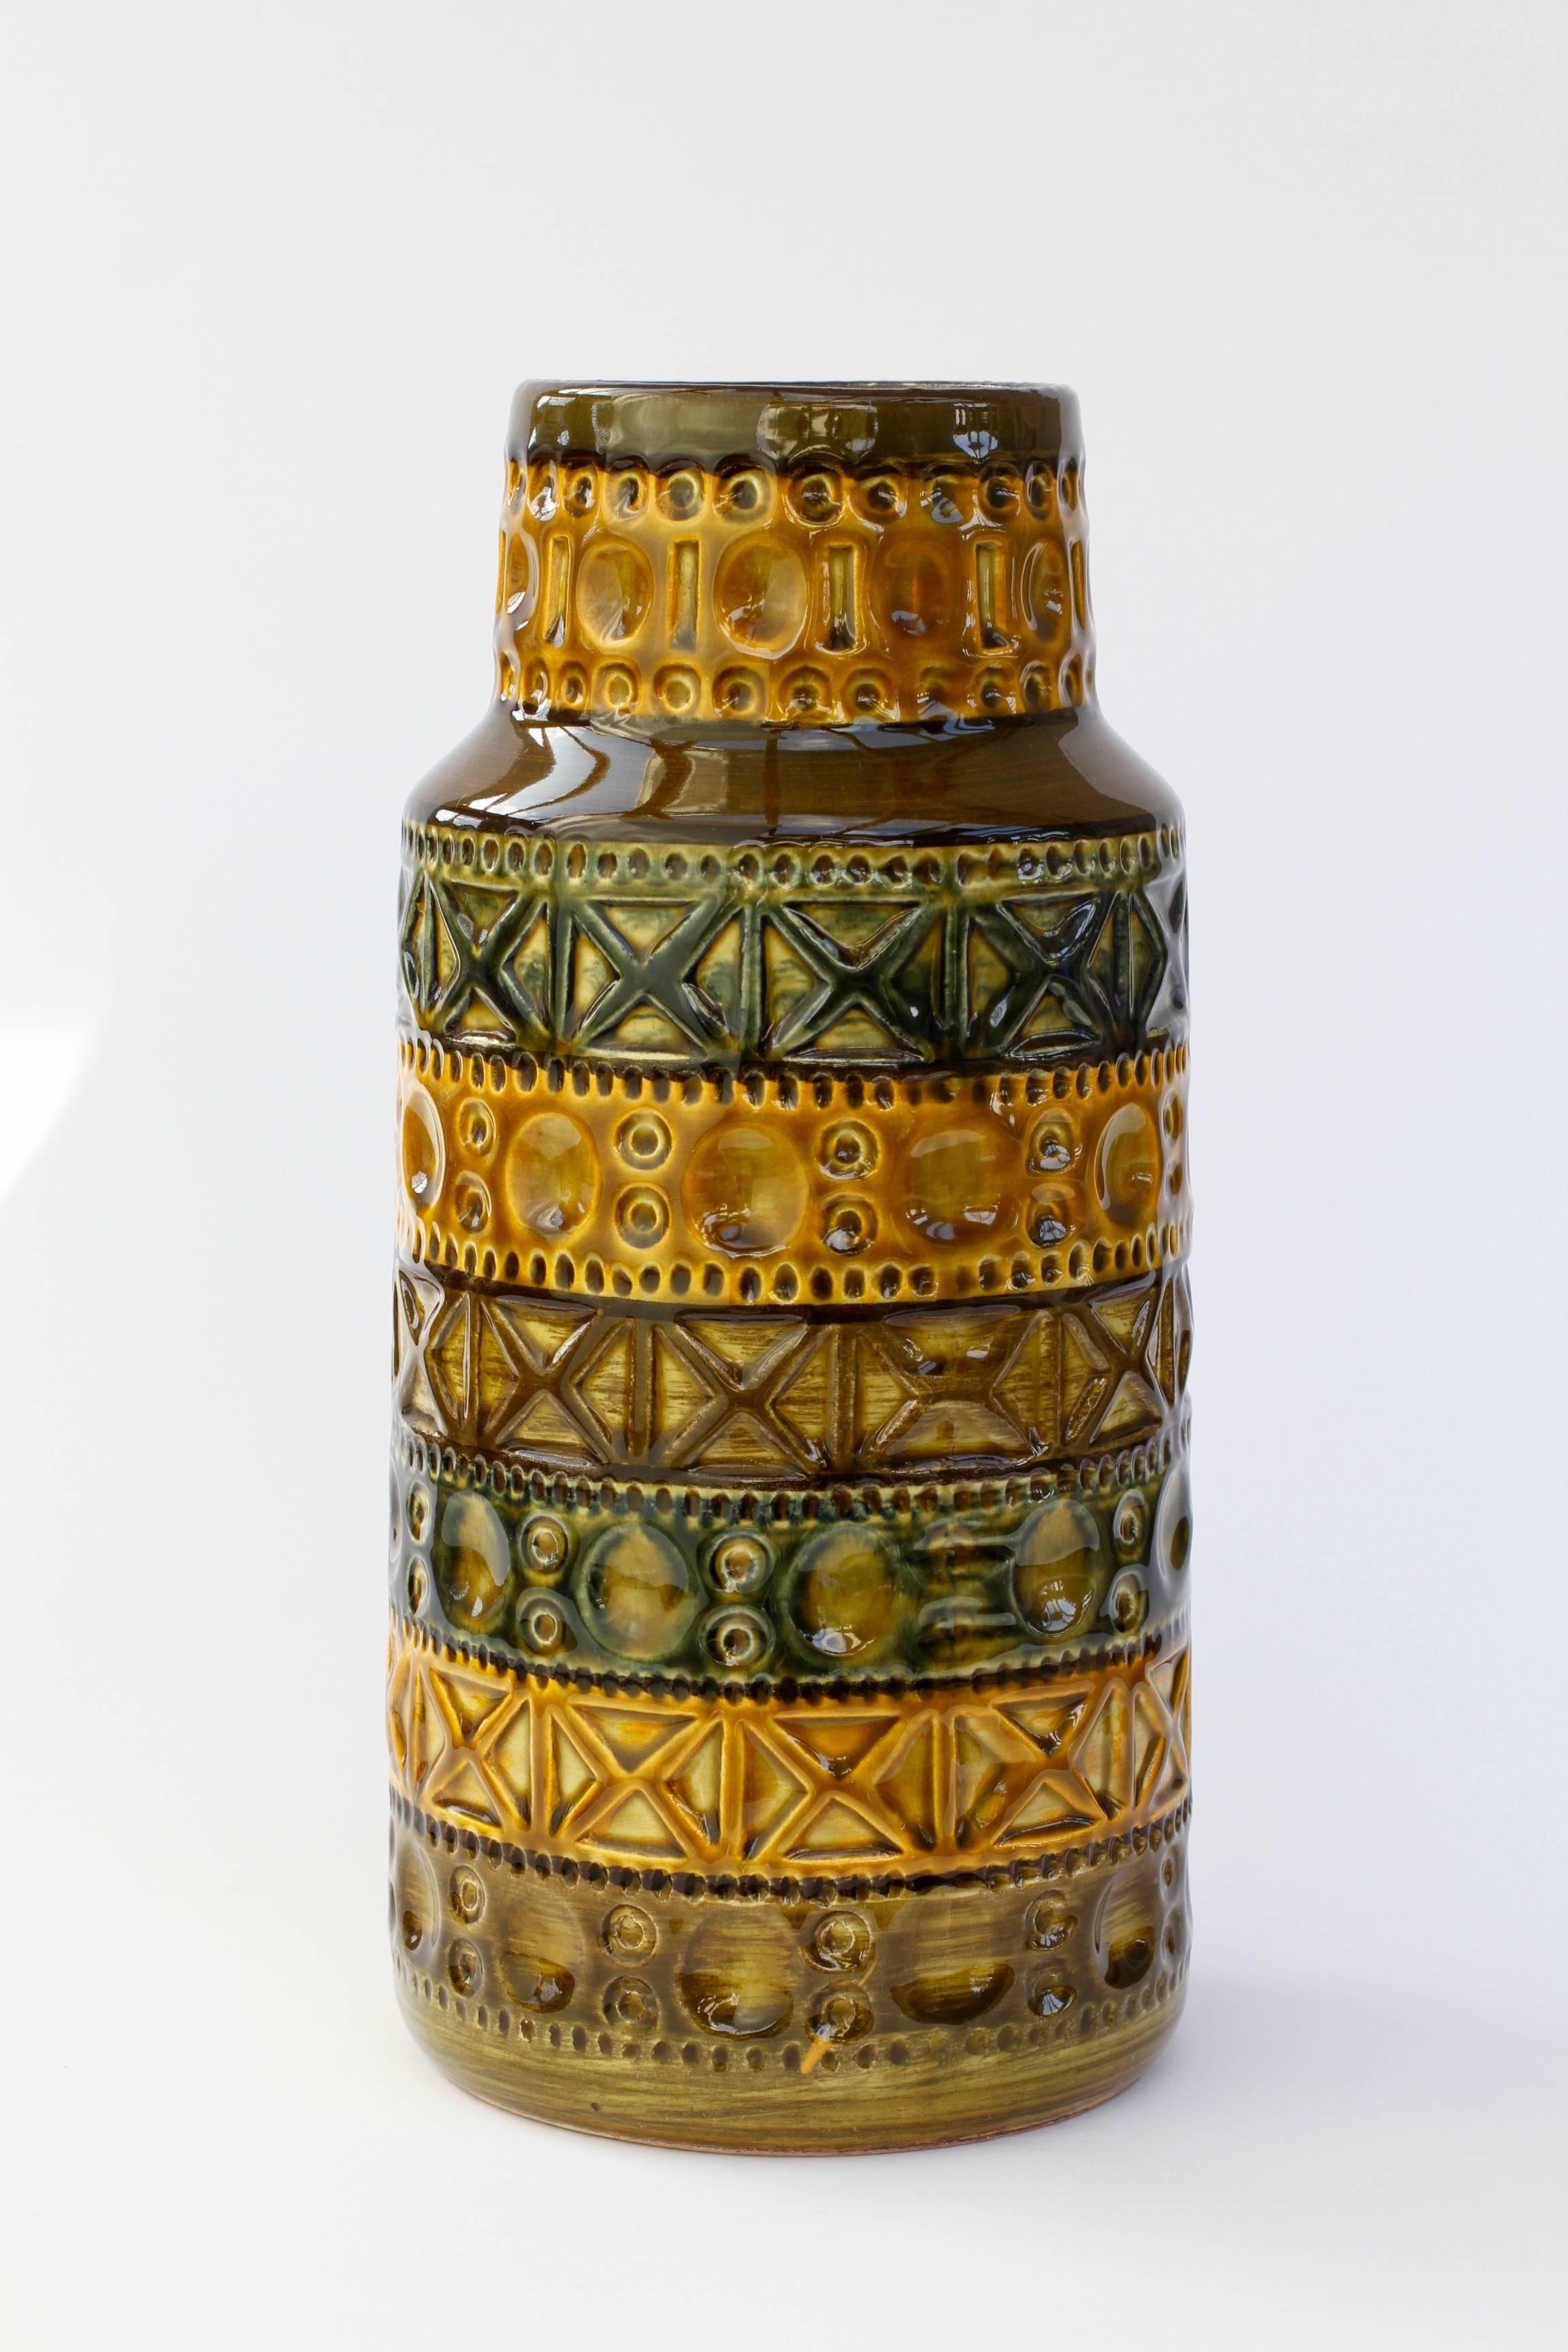 Beautiful vintage vase attributed to designer Bodo Mans and produced by Bay Keramik in the early to mid-1970s. The Inca style relief pattern, captured in a mustard yellow or green, looks somehow Aztec like whilst maintaining a modern feel. This